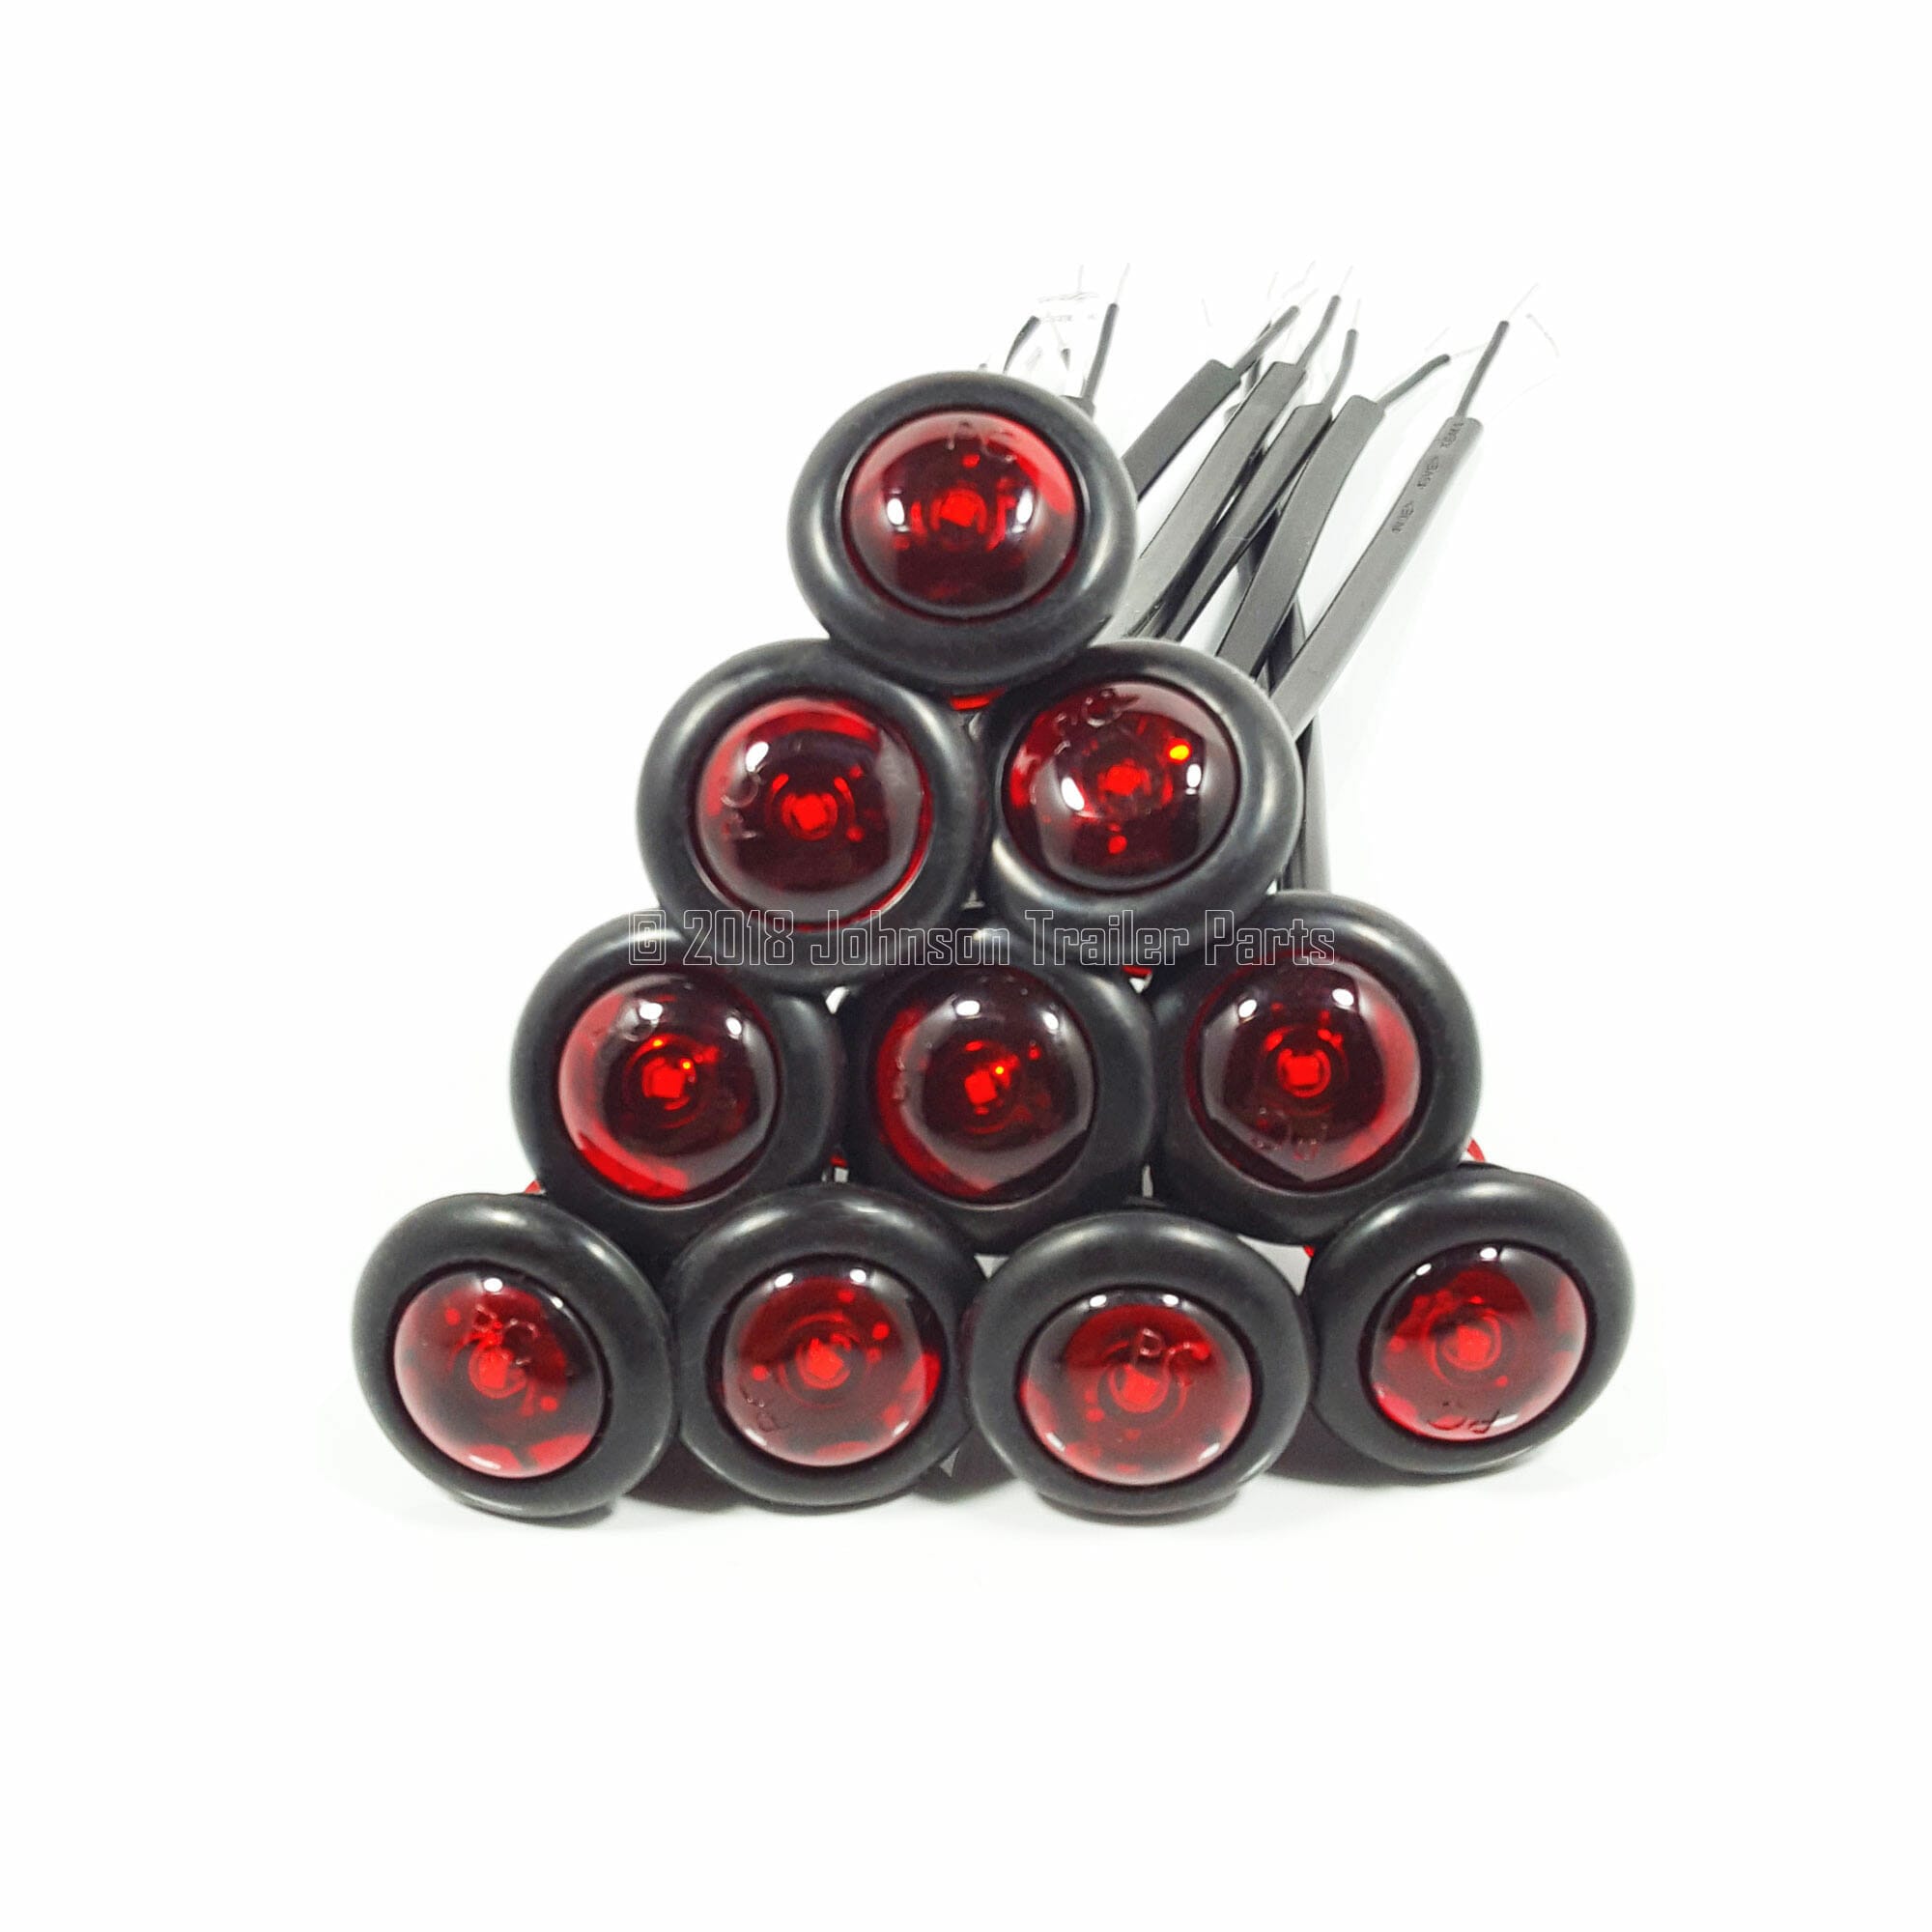 10 Pack - 3/4 Red Side Marker LED Lights (PC Rated)